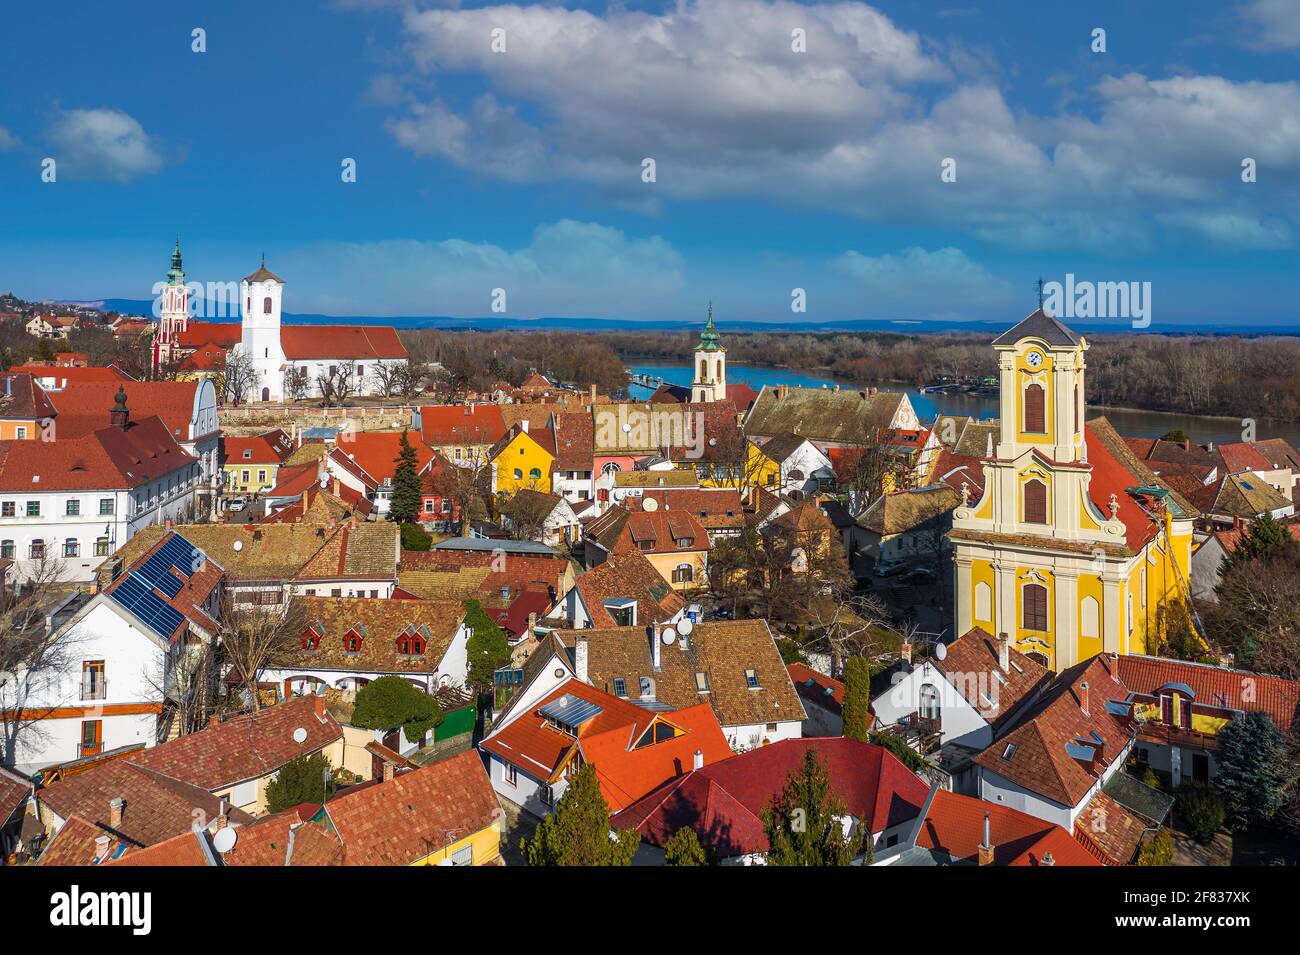 Szentendre, hungary - Aerial view of the city of Szentendre on a sunny day with Belgrade Serbian Orthodox Cathedral, Saint John the Baptist's Parish C Stock Photo